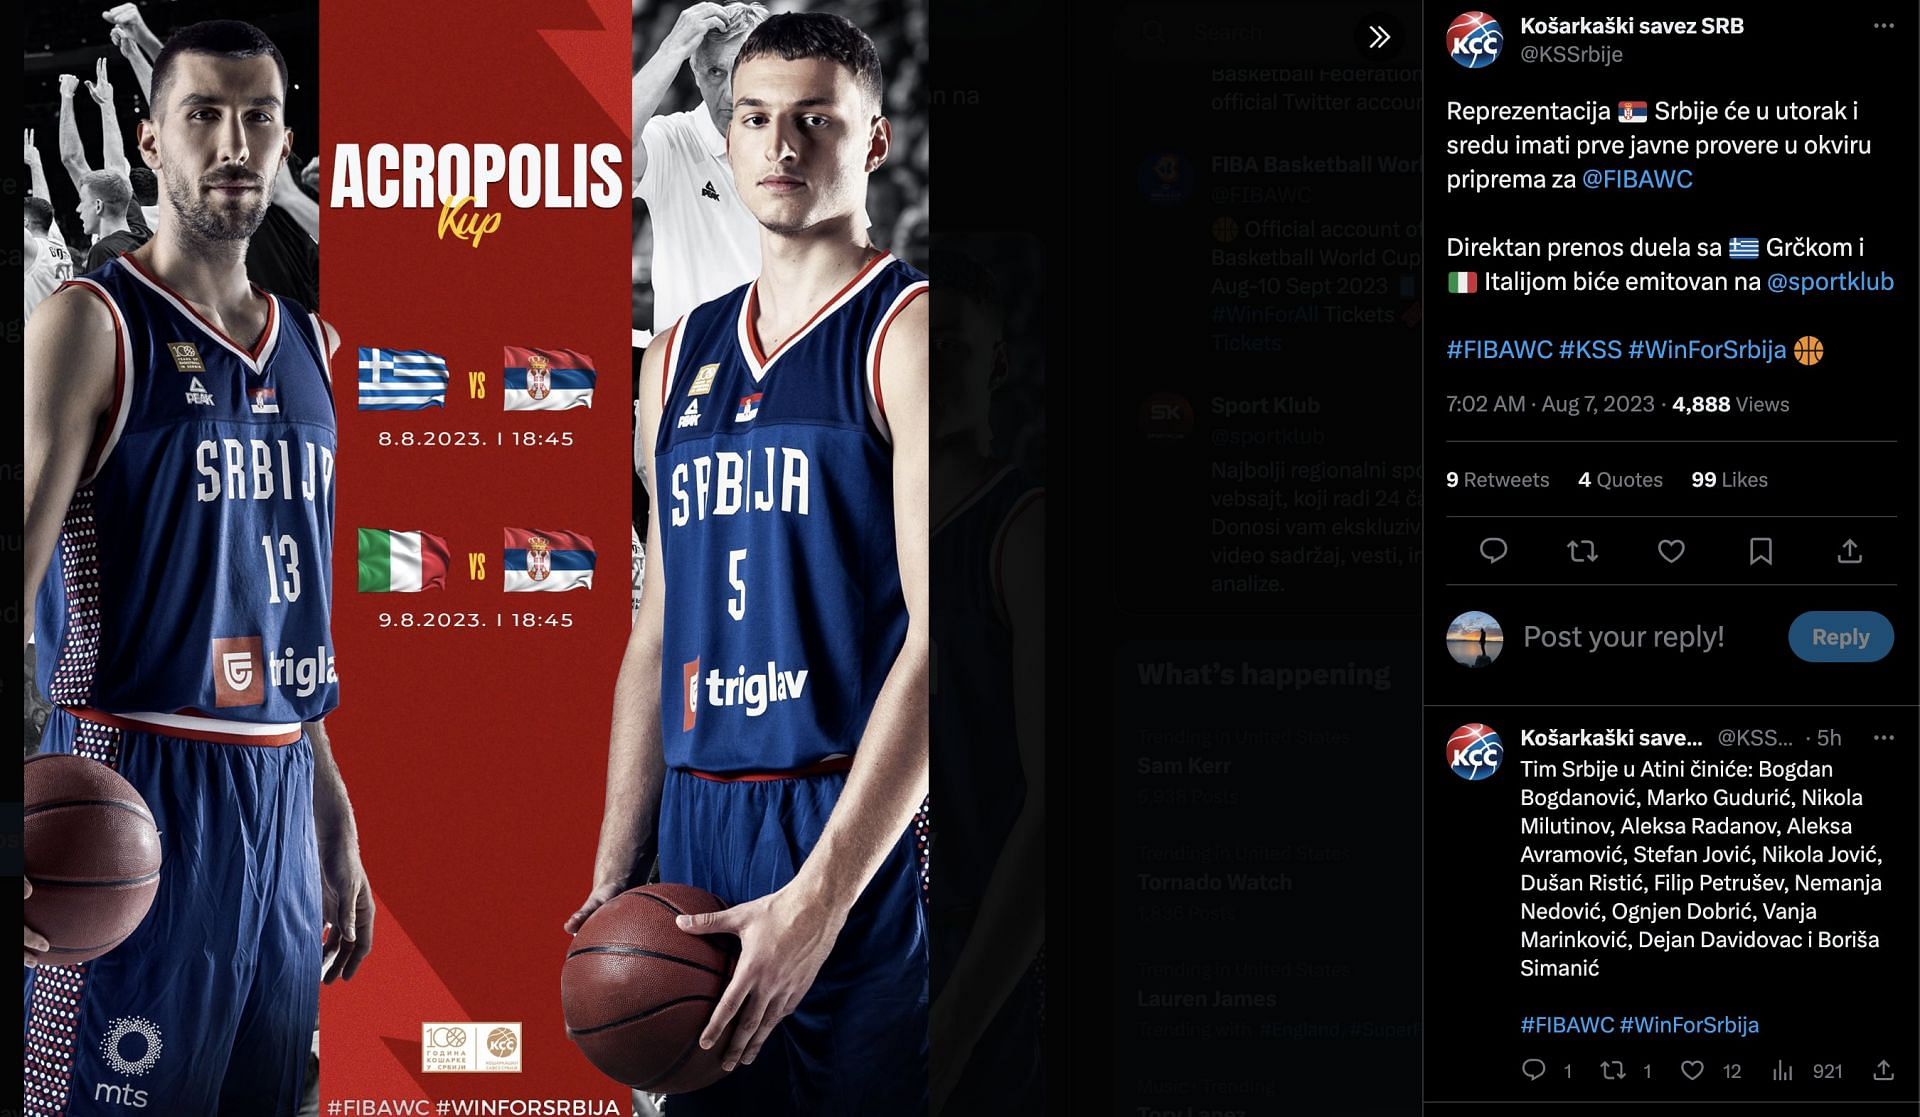 Greece vs Serbia FIBA World Cup 2023 tuneup, August 8th Date, time, where to watch, live stream details, and more